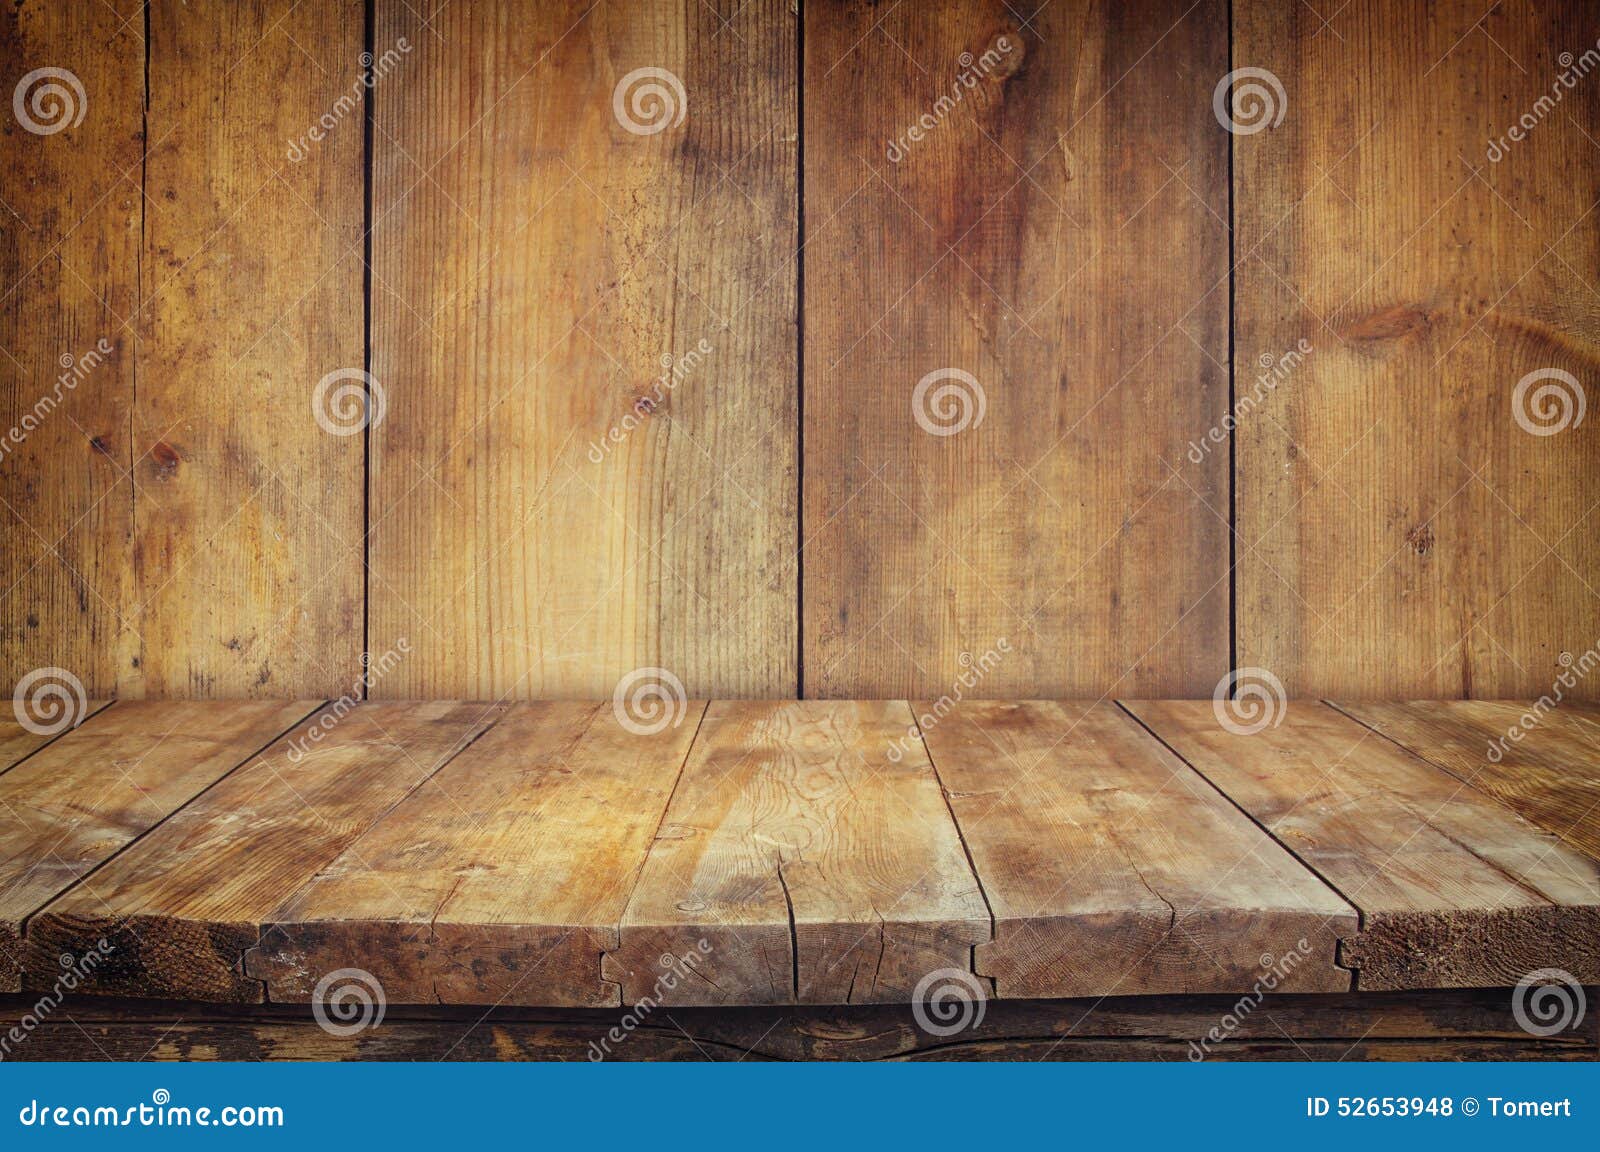 grunge vintage wooden board table in front of old wooden background. ready for product display montages